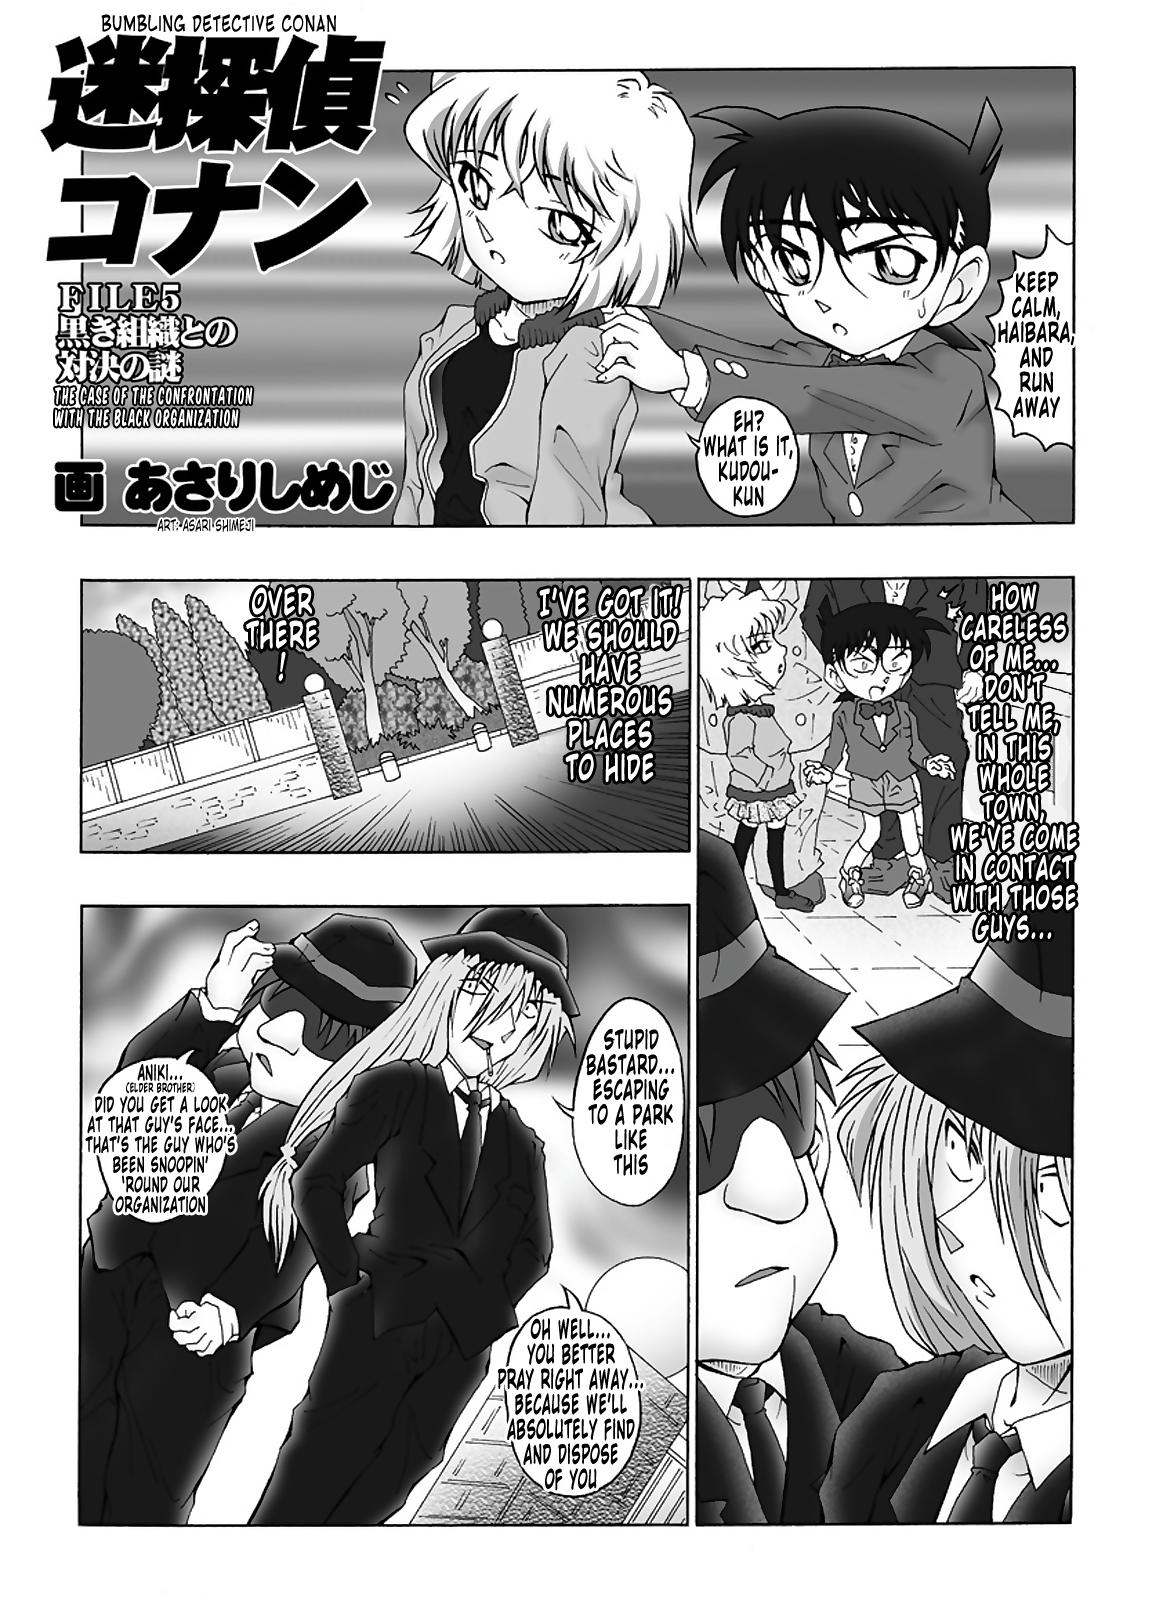 Best Blow Job Bumbling Detective Conan - File 5: The Case of The Confrontation with The Black Organiztion - Detective conan Cheating Wife - Page 4